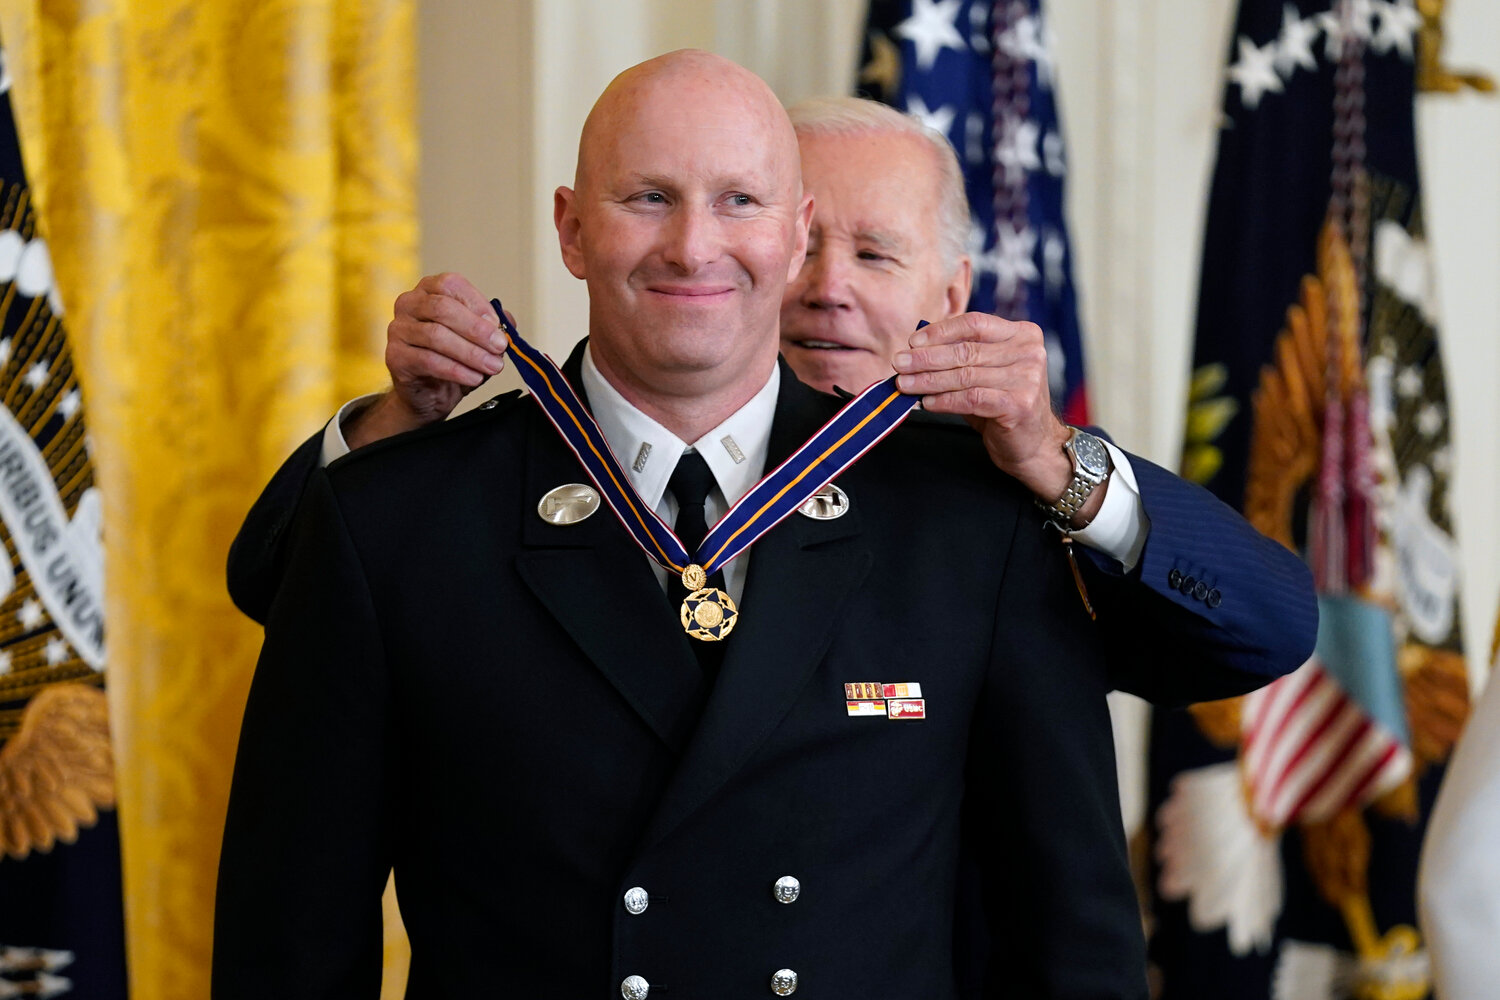 President Joe Biden presenting the Medal of Valor, the nation's highest honor for bravery by a public safety officer, to FDNY Lt. Justin Hespeler Wednesday in the East Room of the White House.